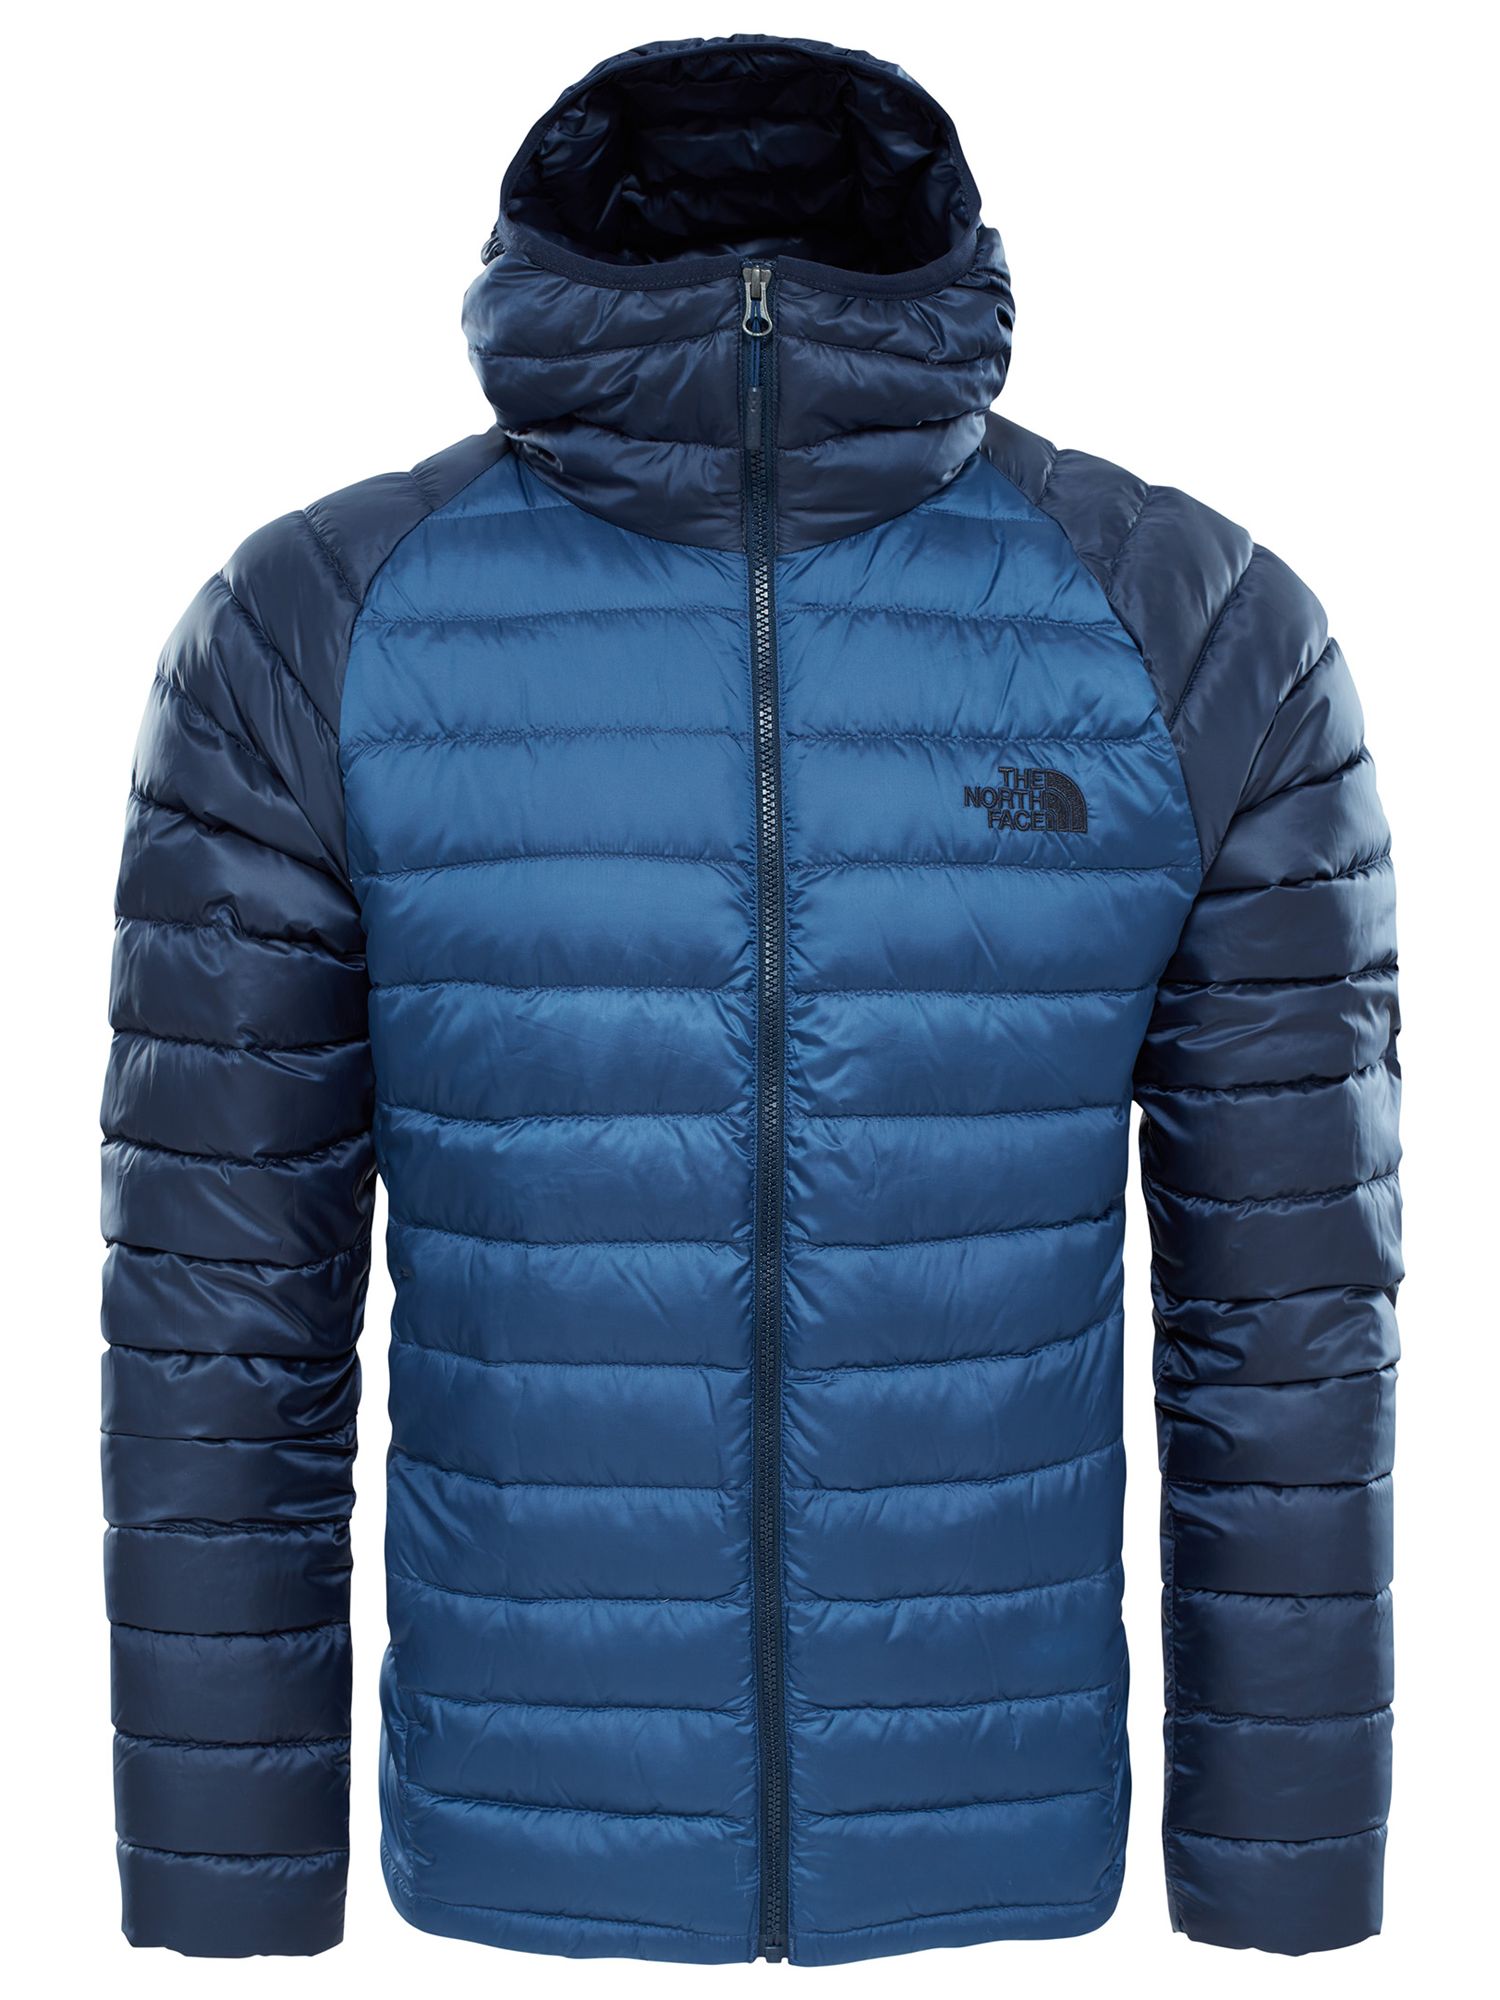 The North Face Men's Trevail Hooded Jacket Review